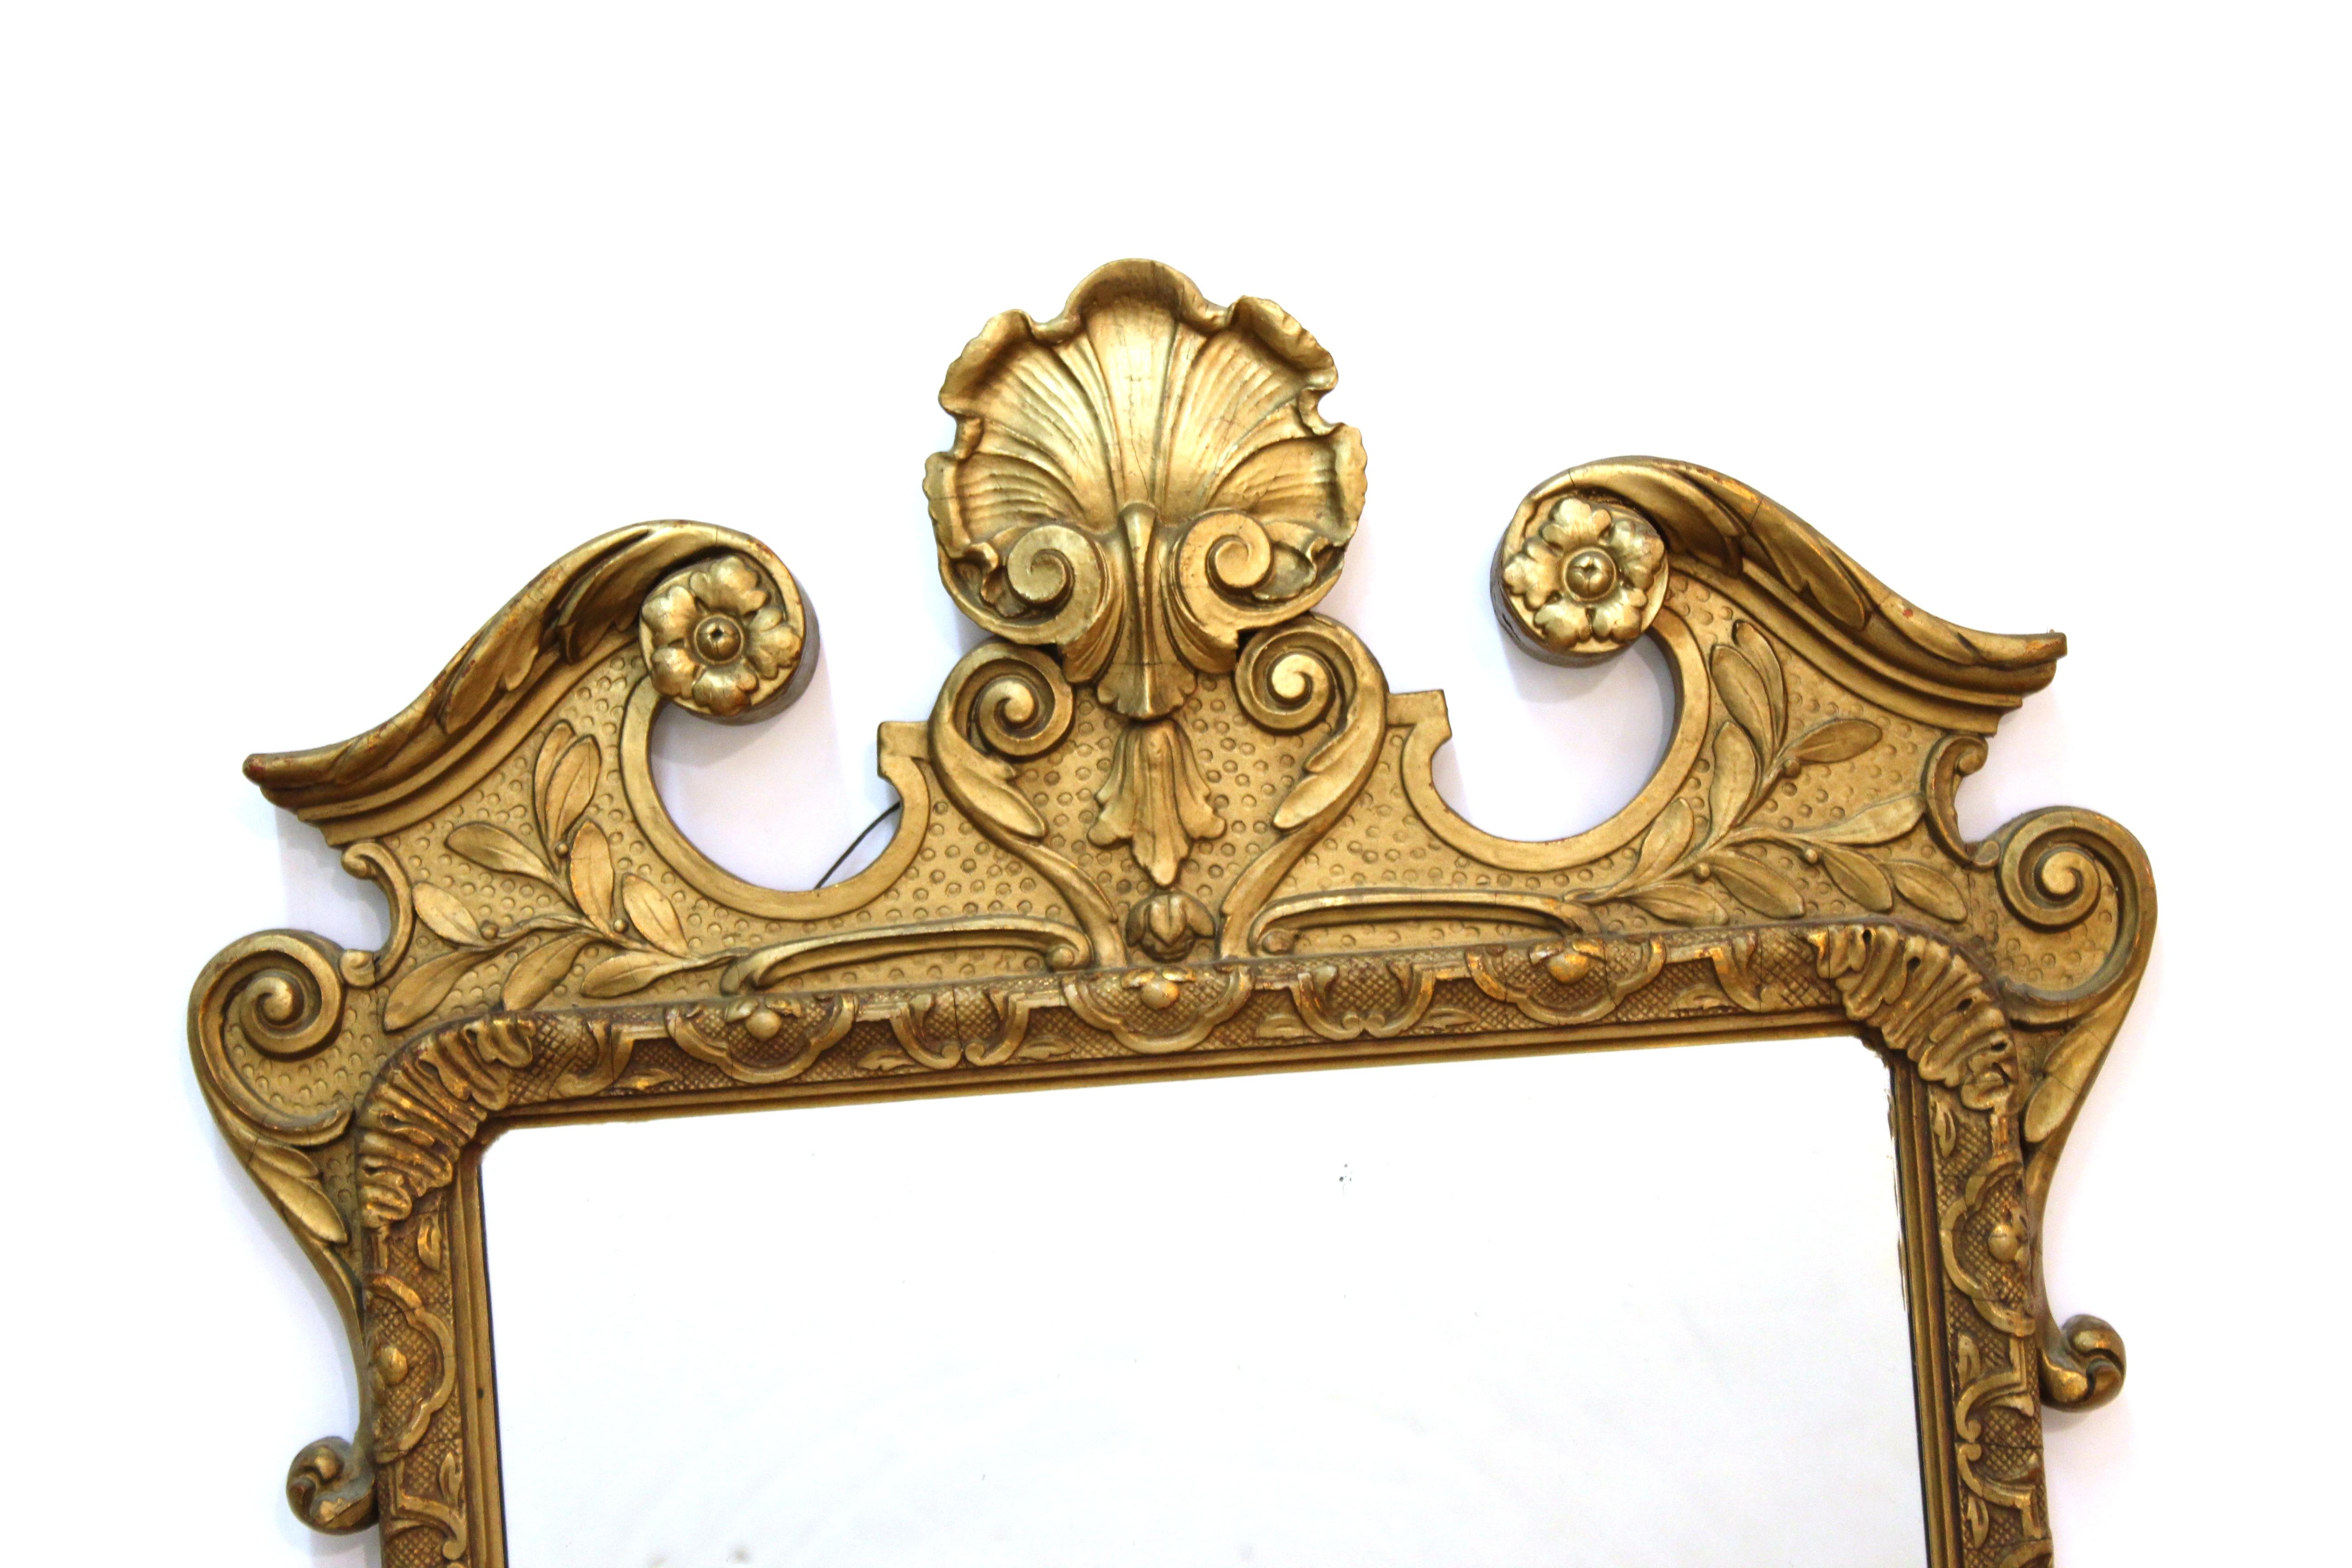 Baroque style carved giltwood wall mirror. The piece has a decorative border with volutes and shells.

Dealer: S138XX